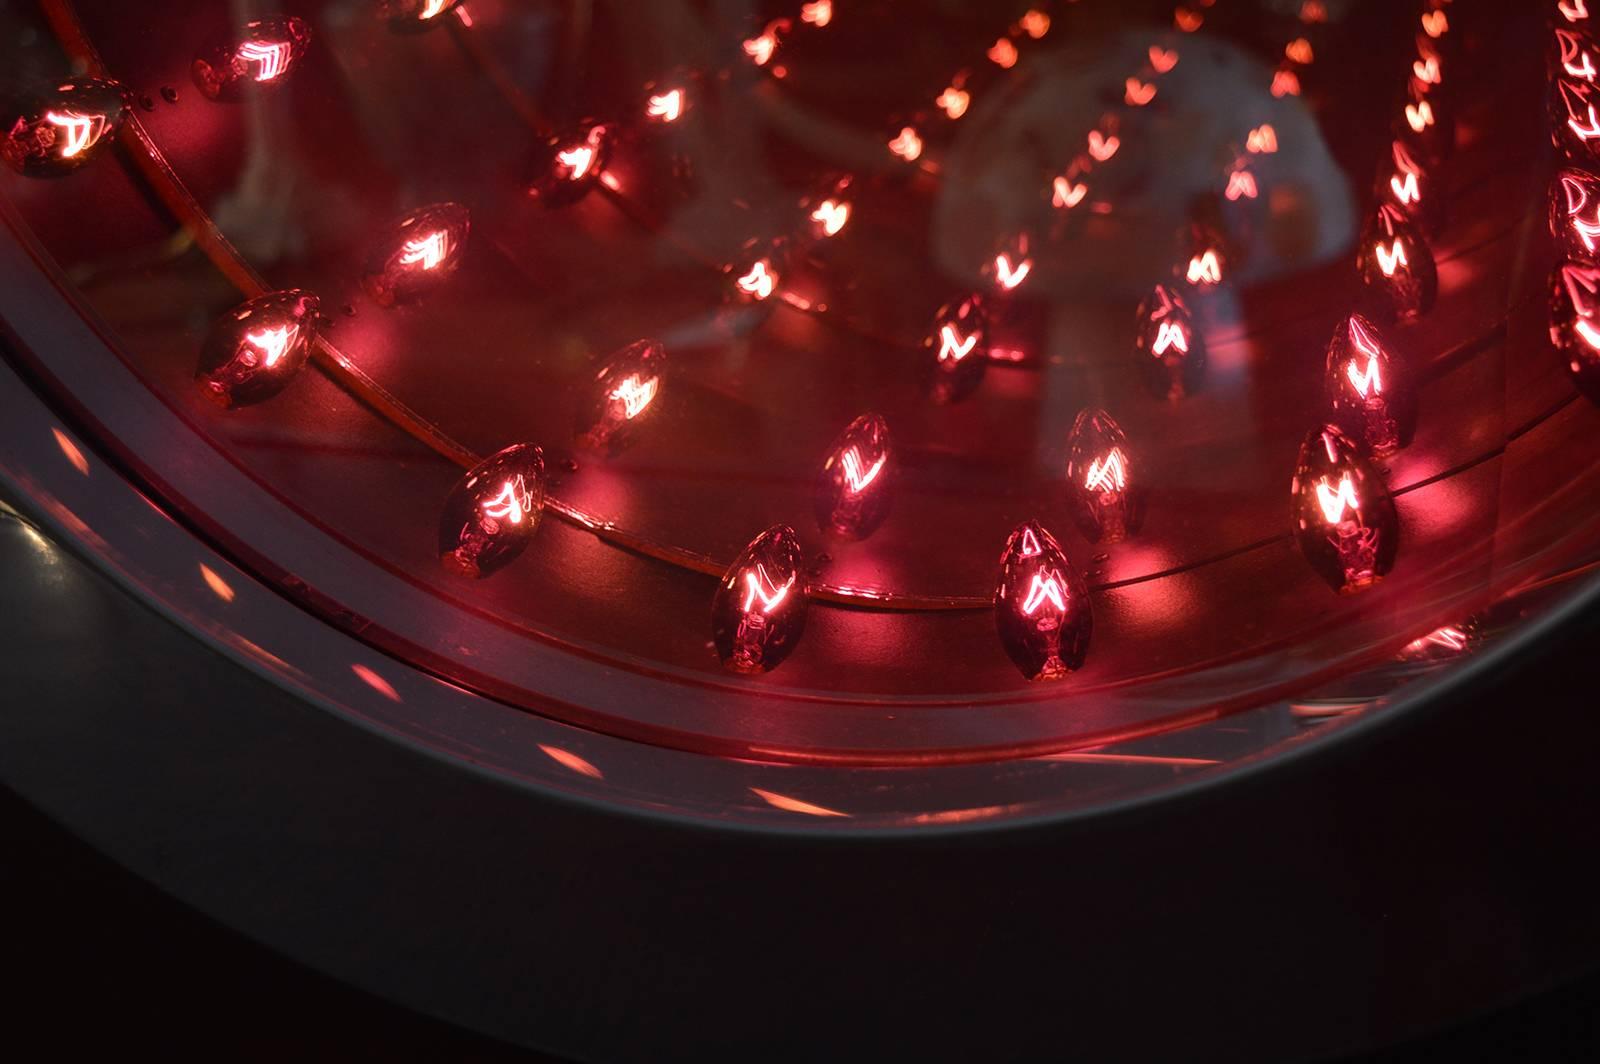 Infinity mirror with red bulbs.